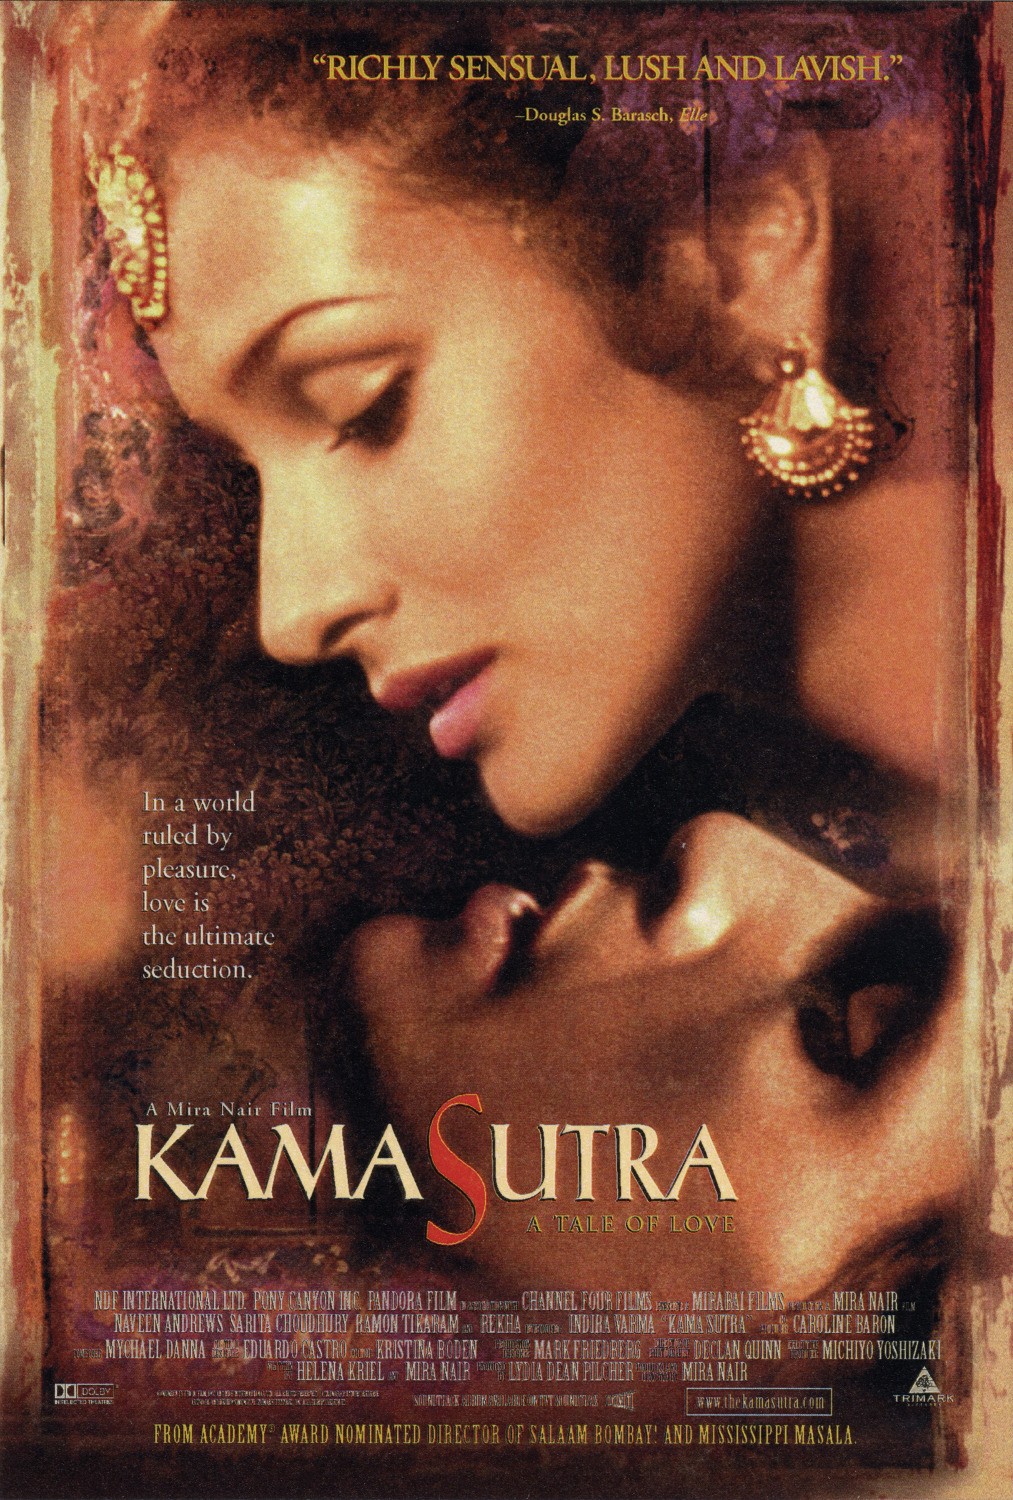 Kama Sutra A Tale of Love 1996 WEB-DL Hindi Full Movie Download 1080p 720p 480p ESubs